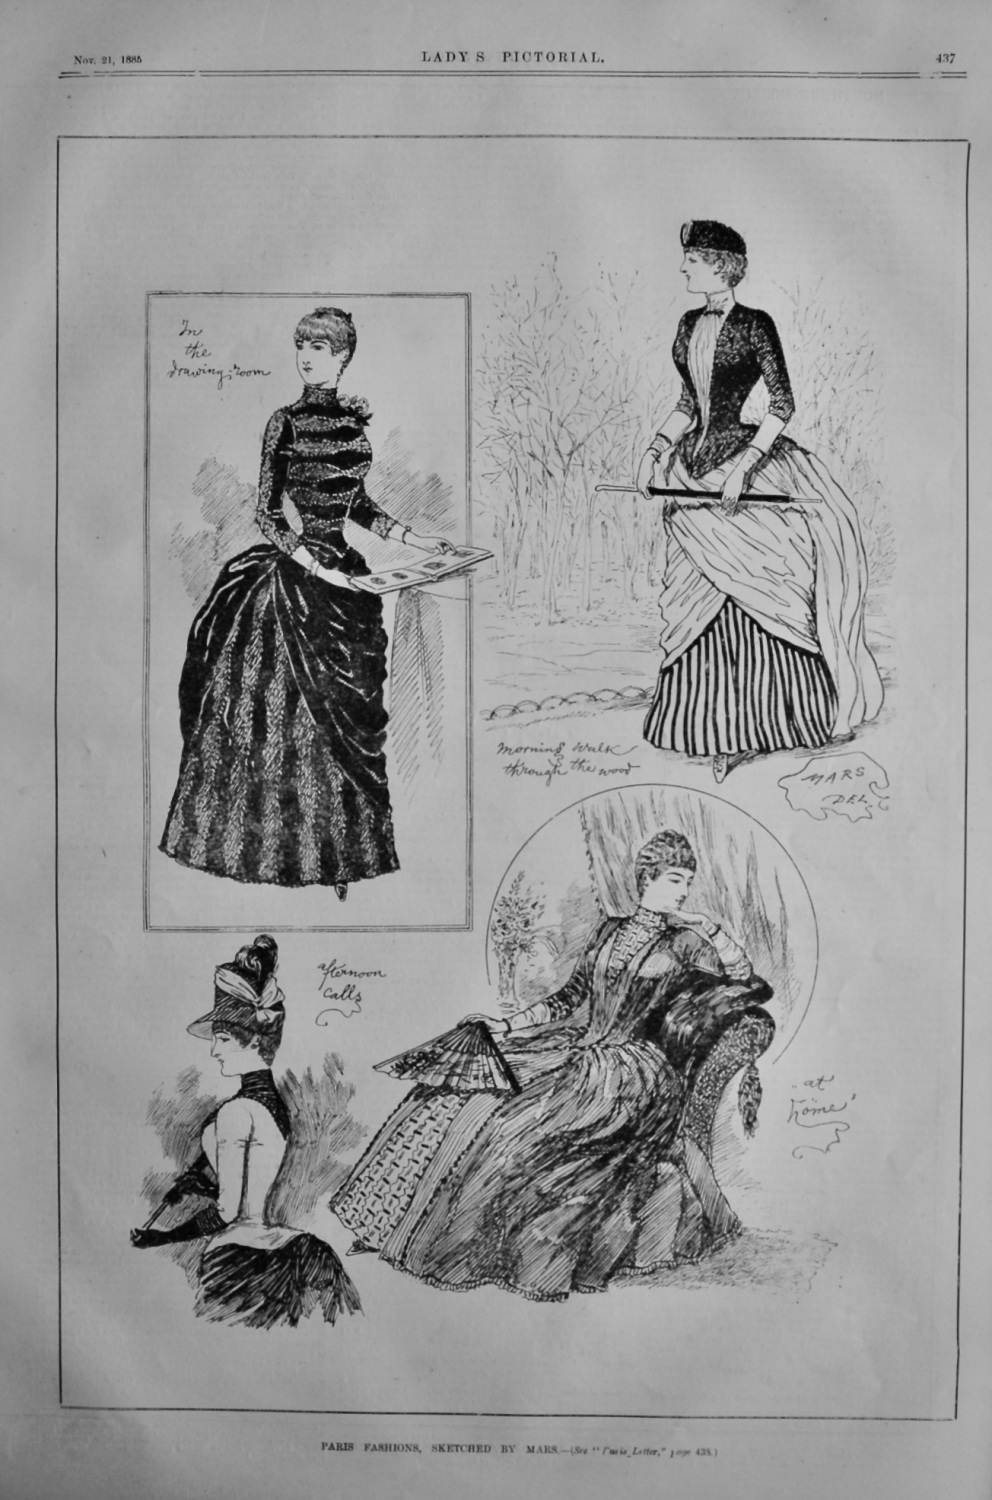 Paris Fashions, Sketched by Mars.  1885.